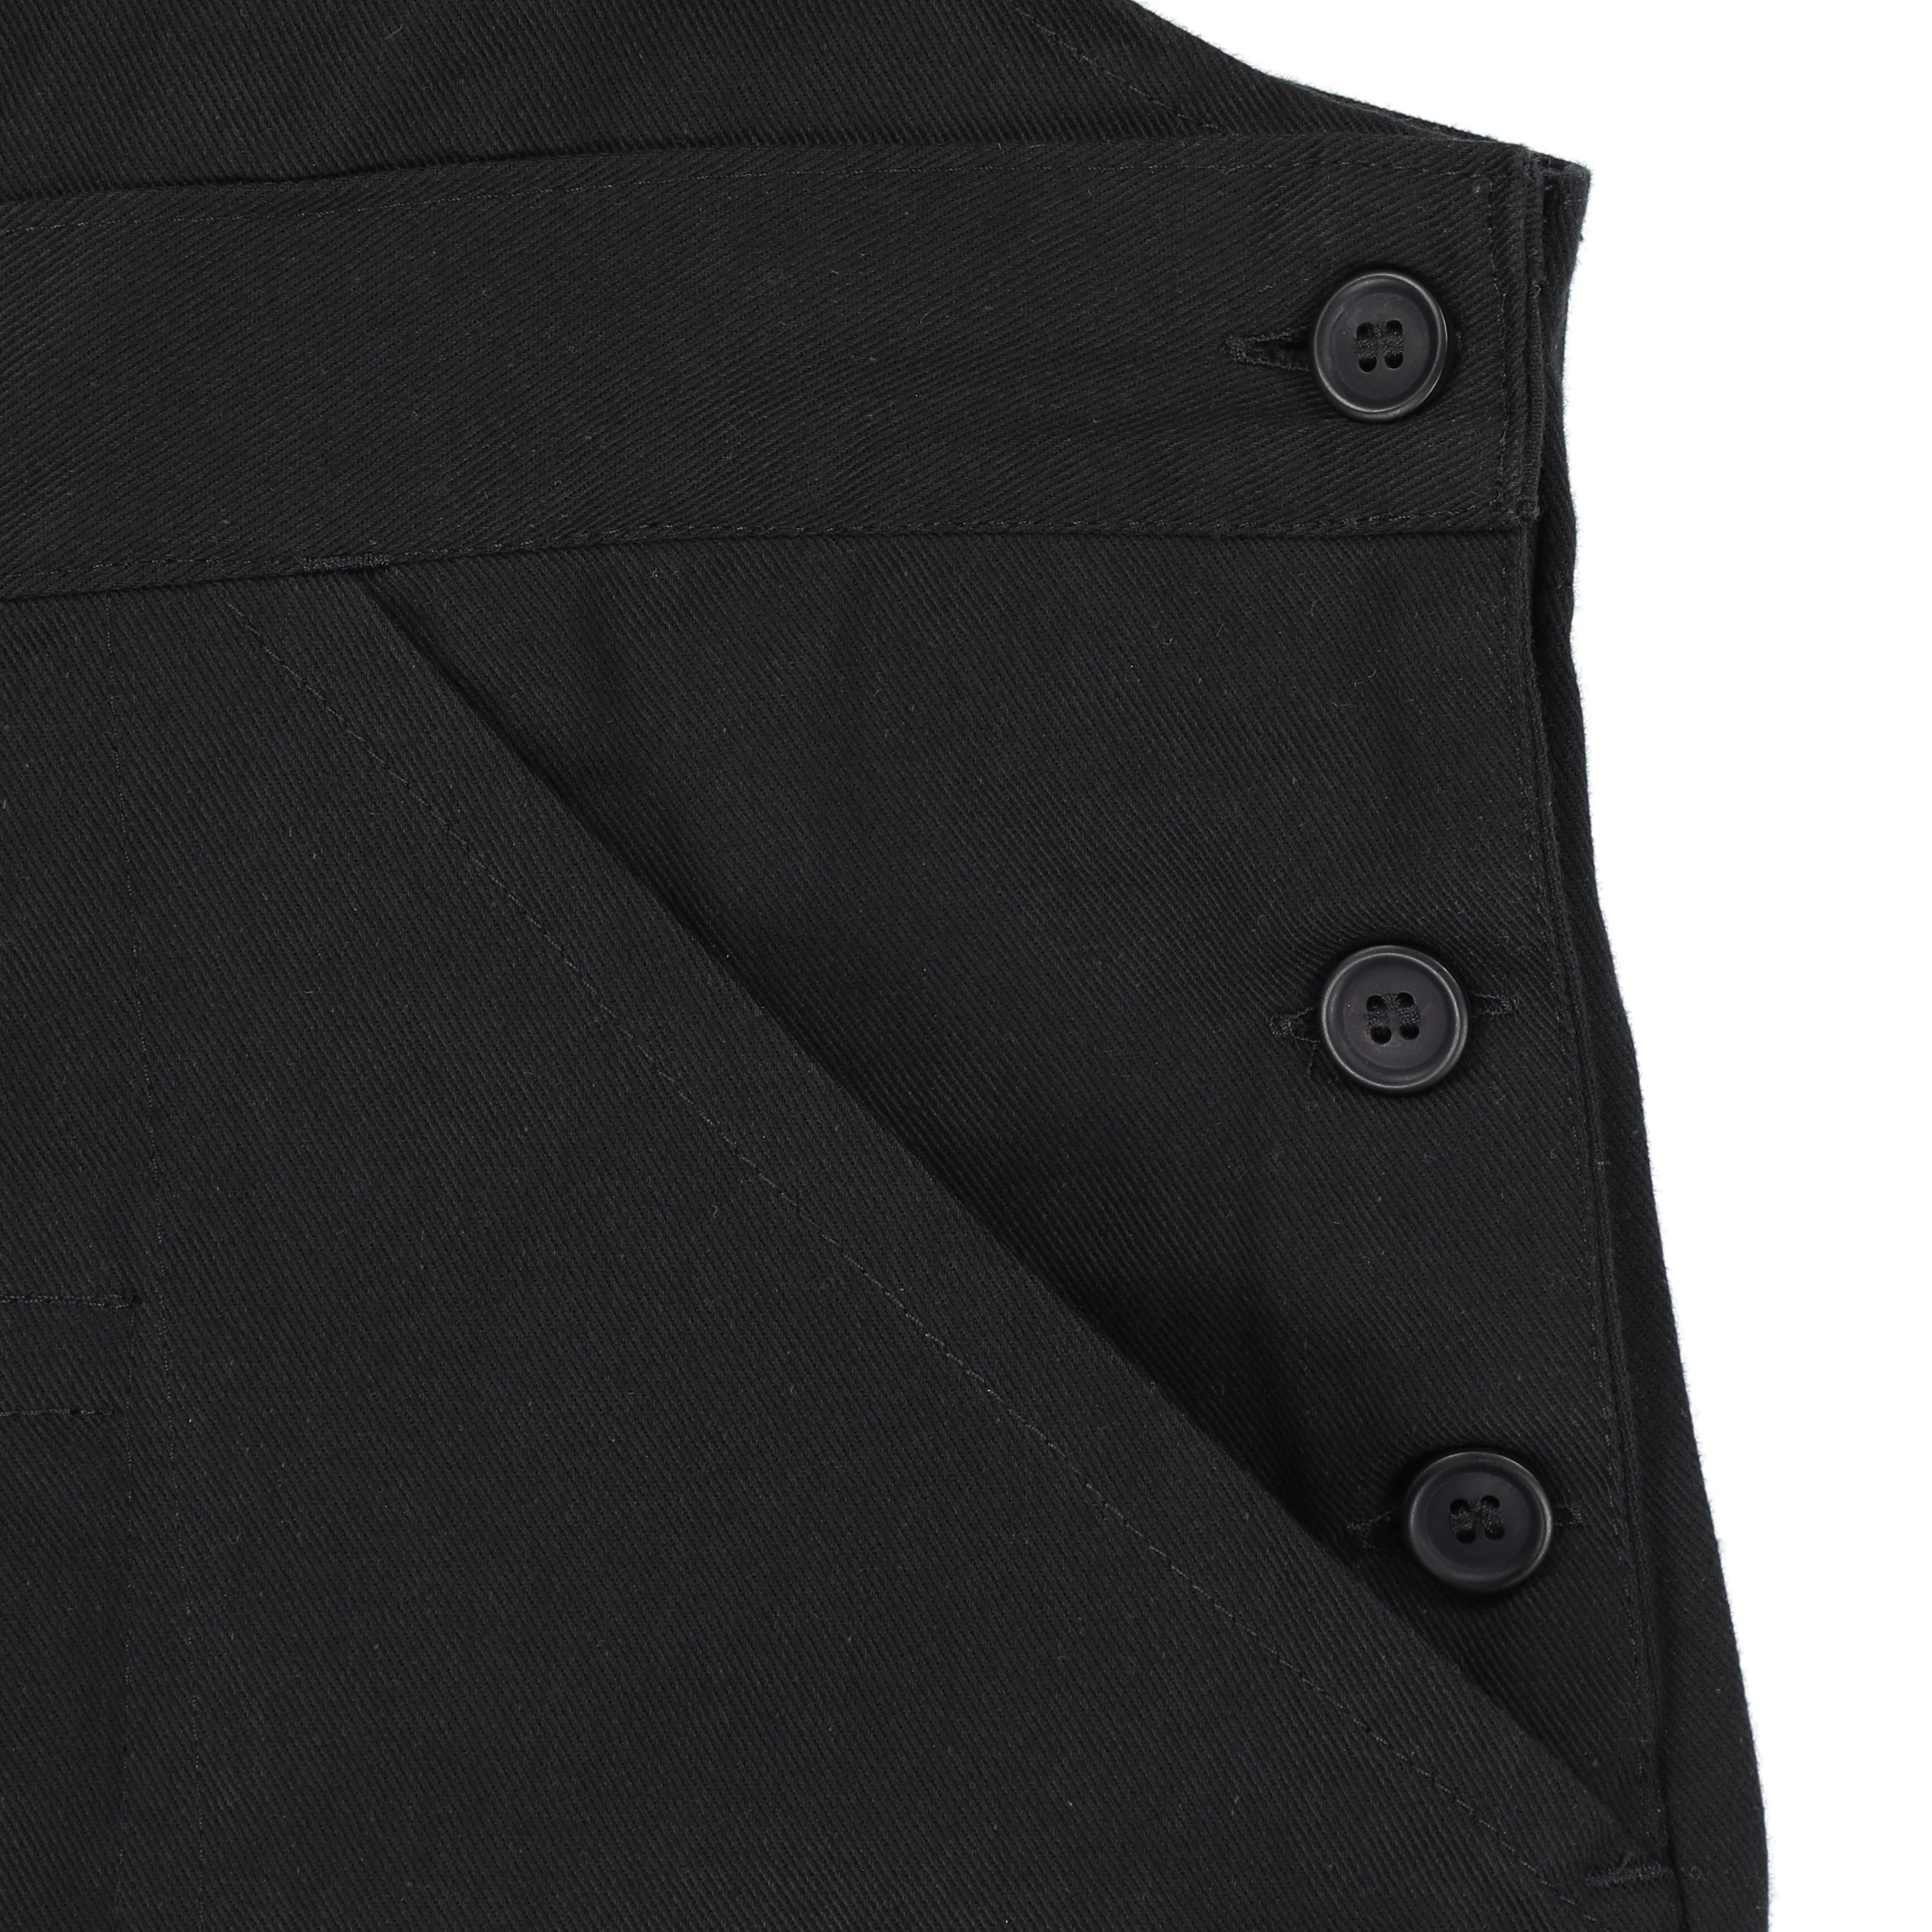 Close up of the button detail and pockets of the black Carrier Company Men's Dungarees